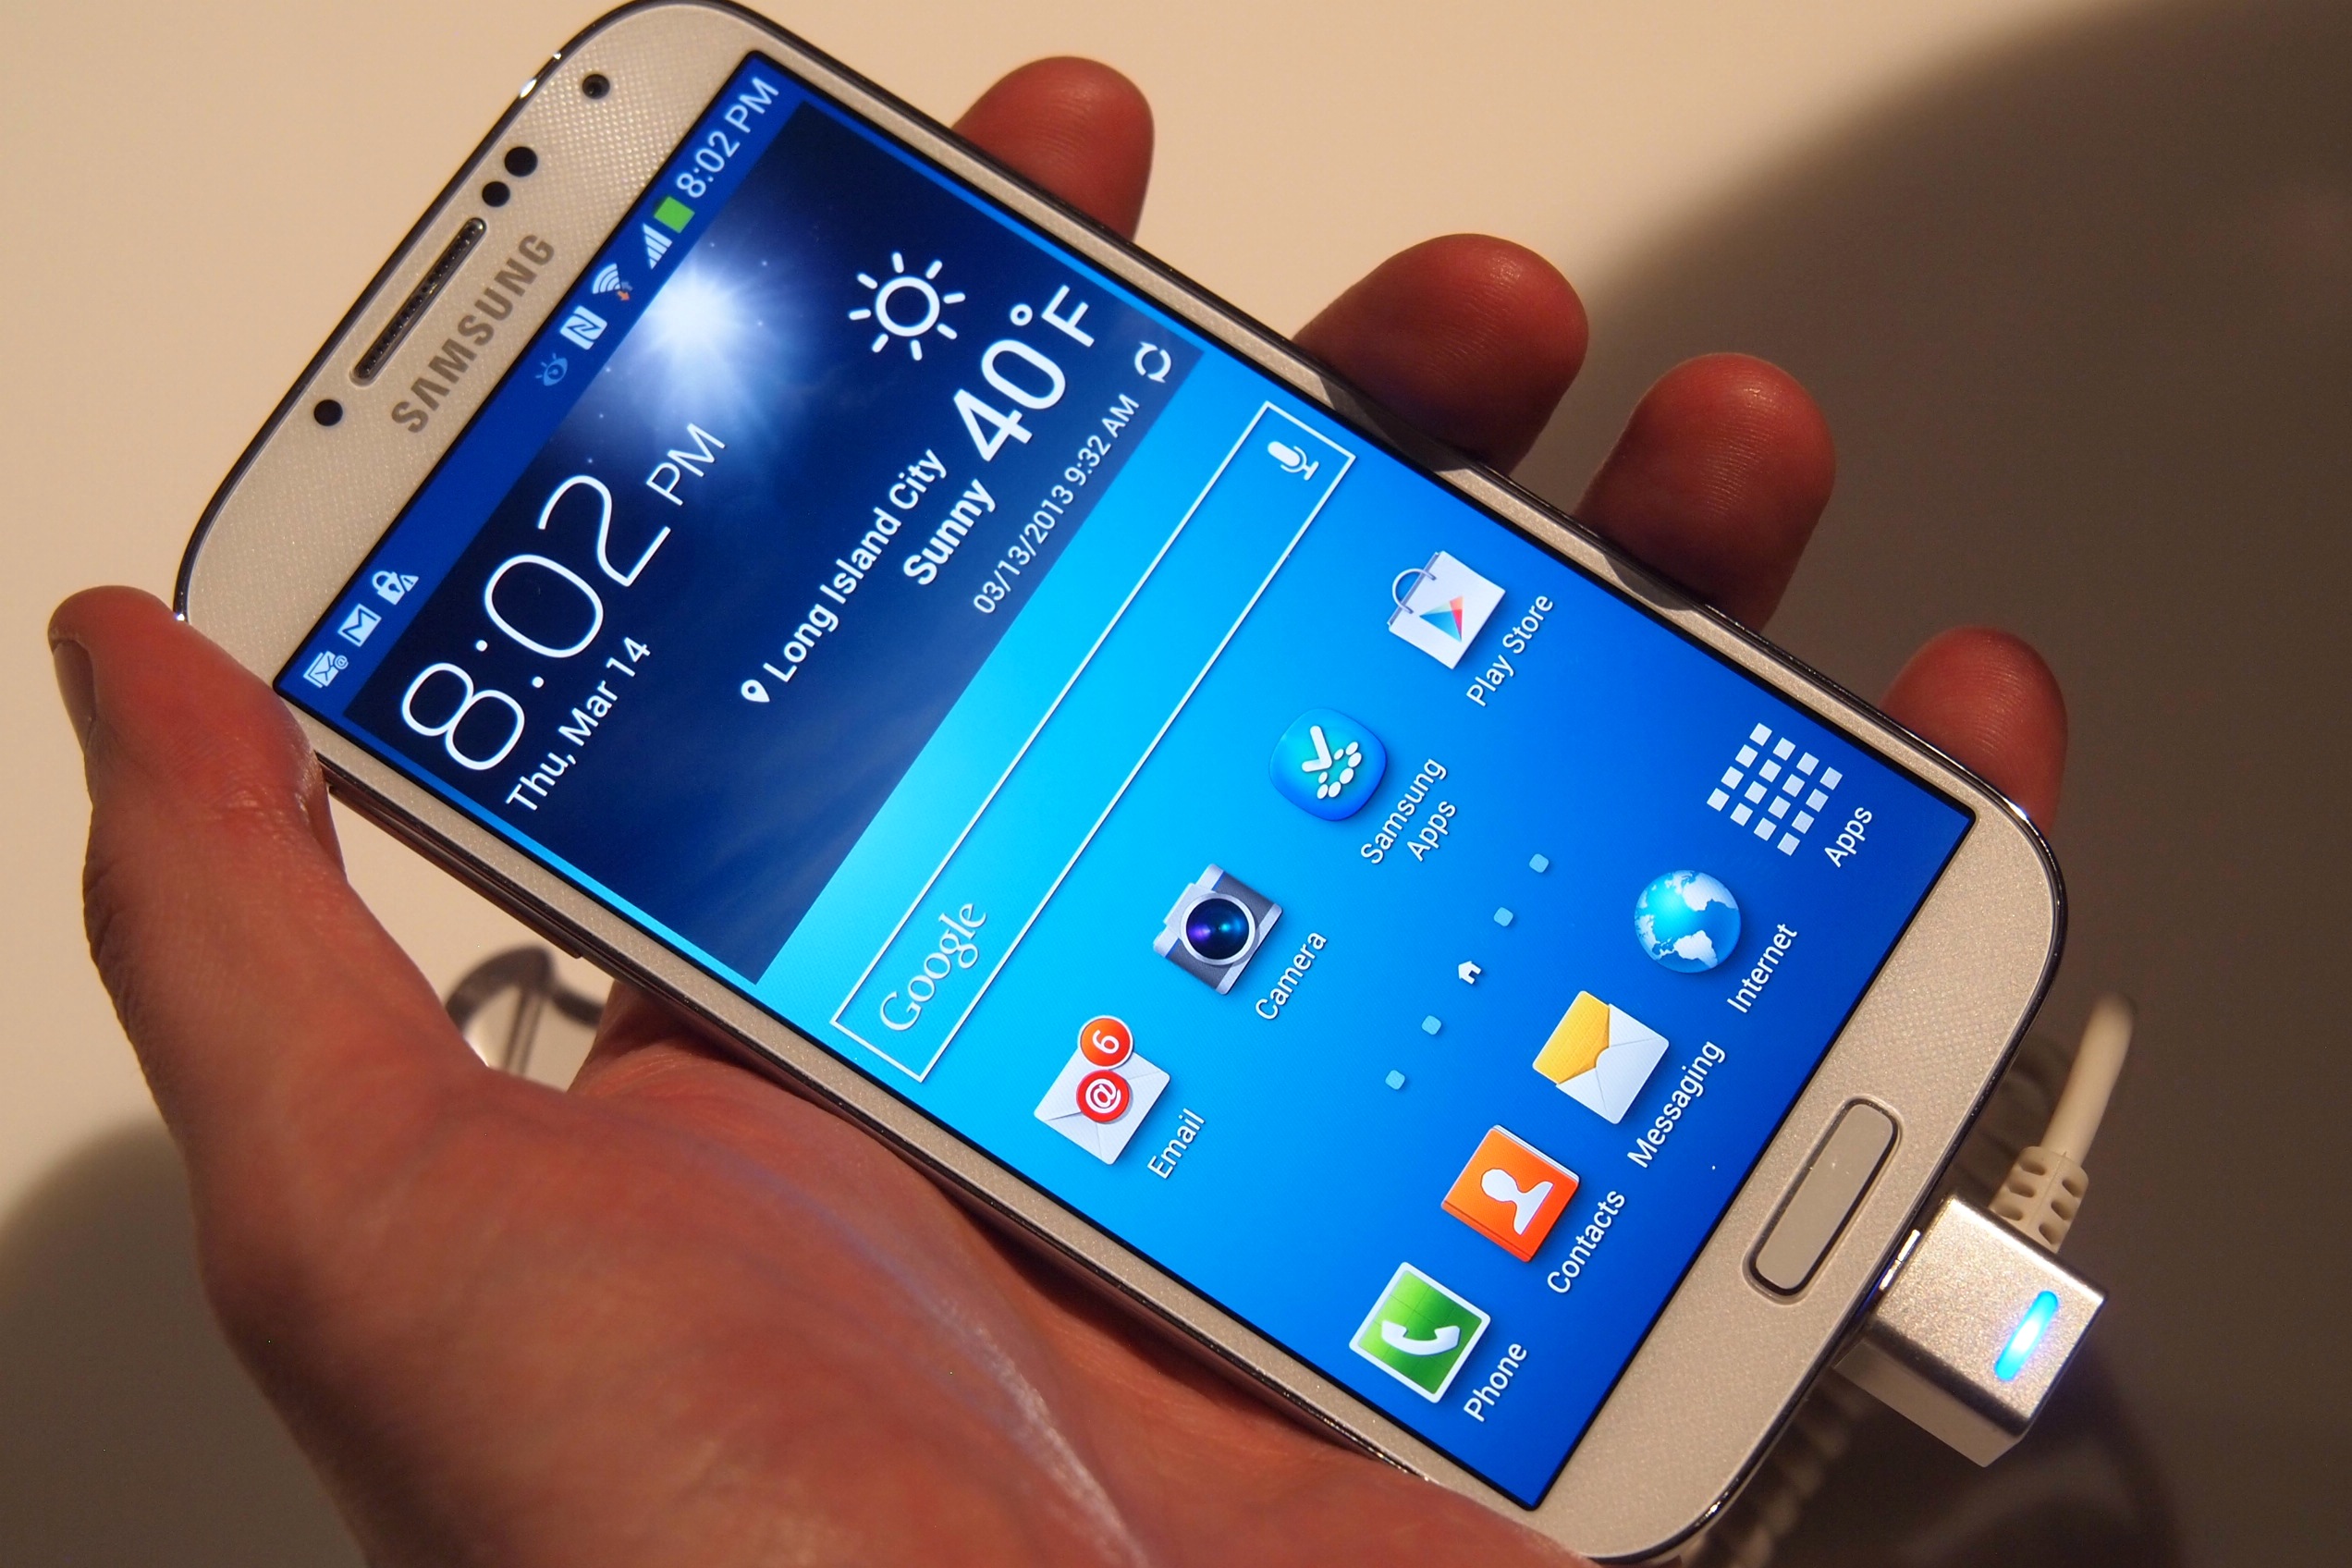 42 Best Android Applications (Apps) for Samsung Galaxy S4